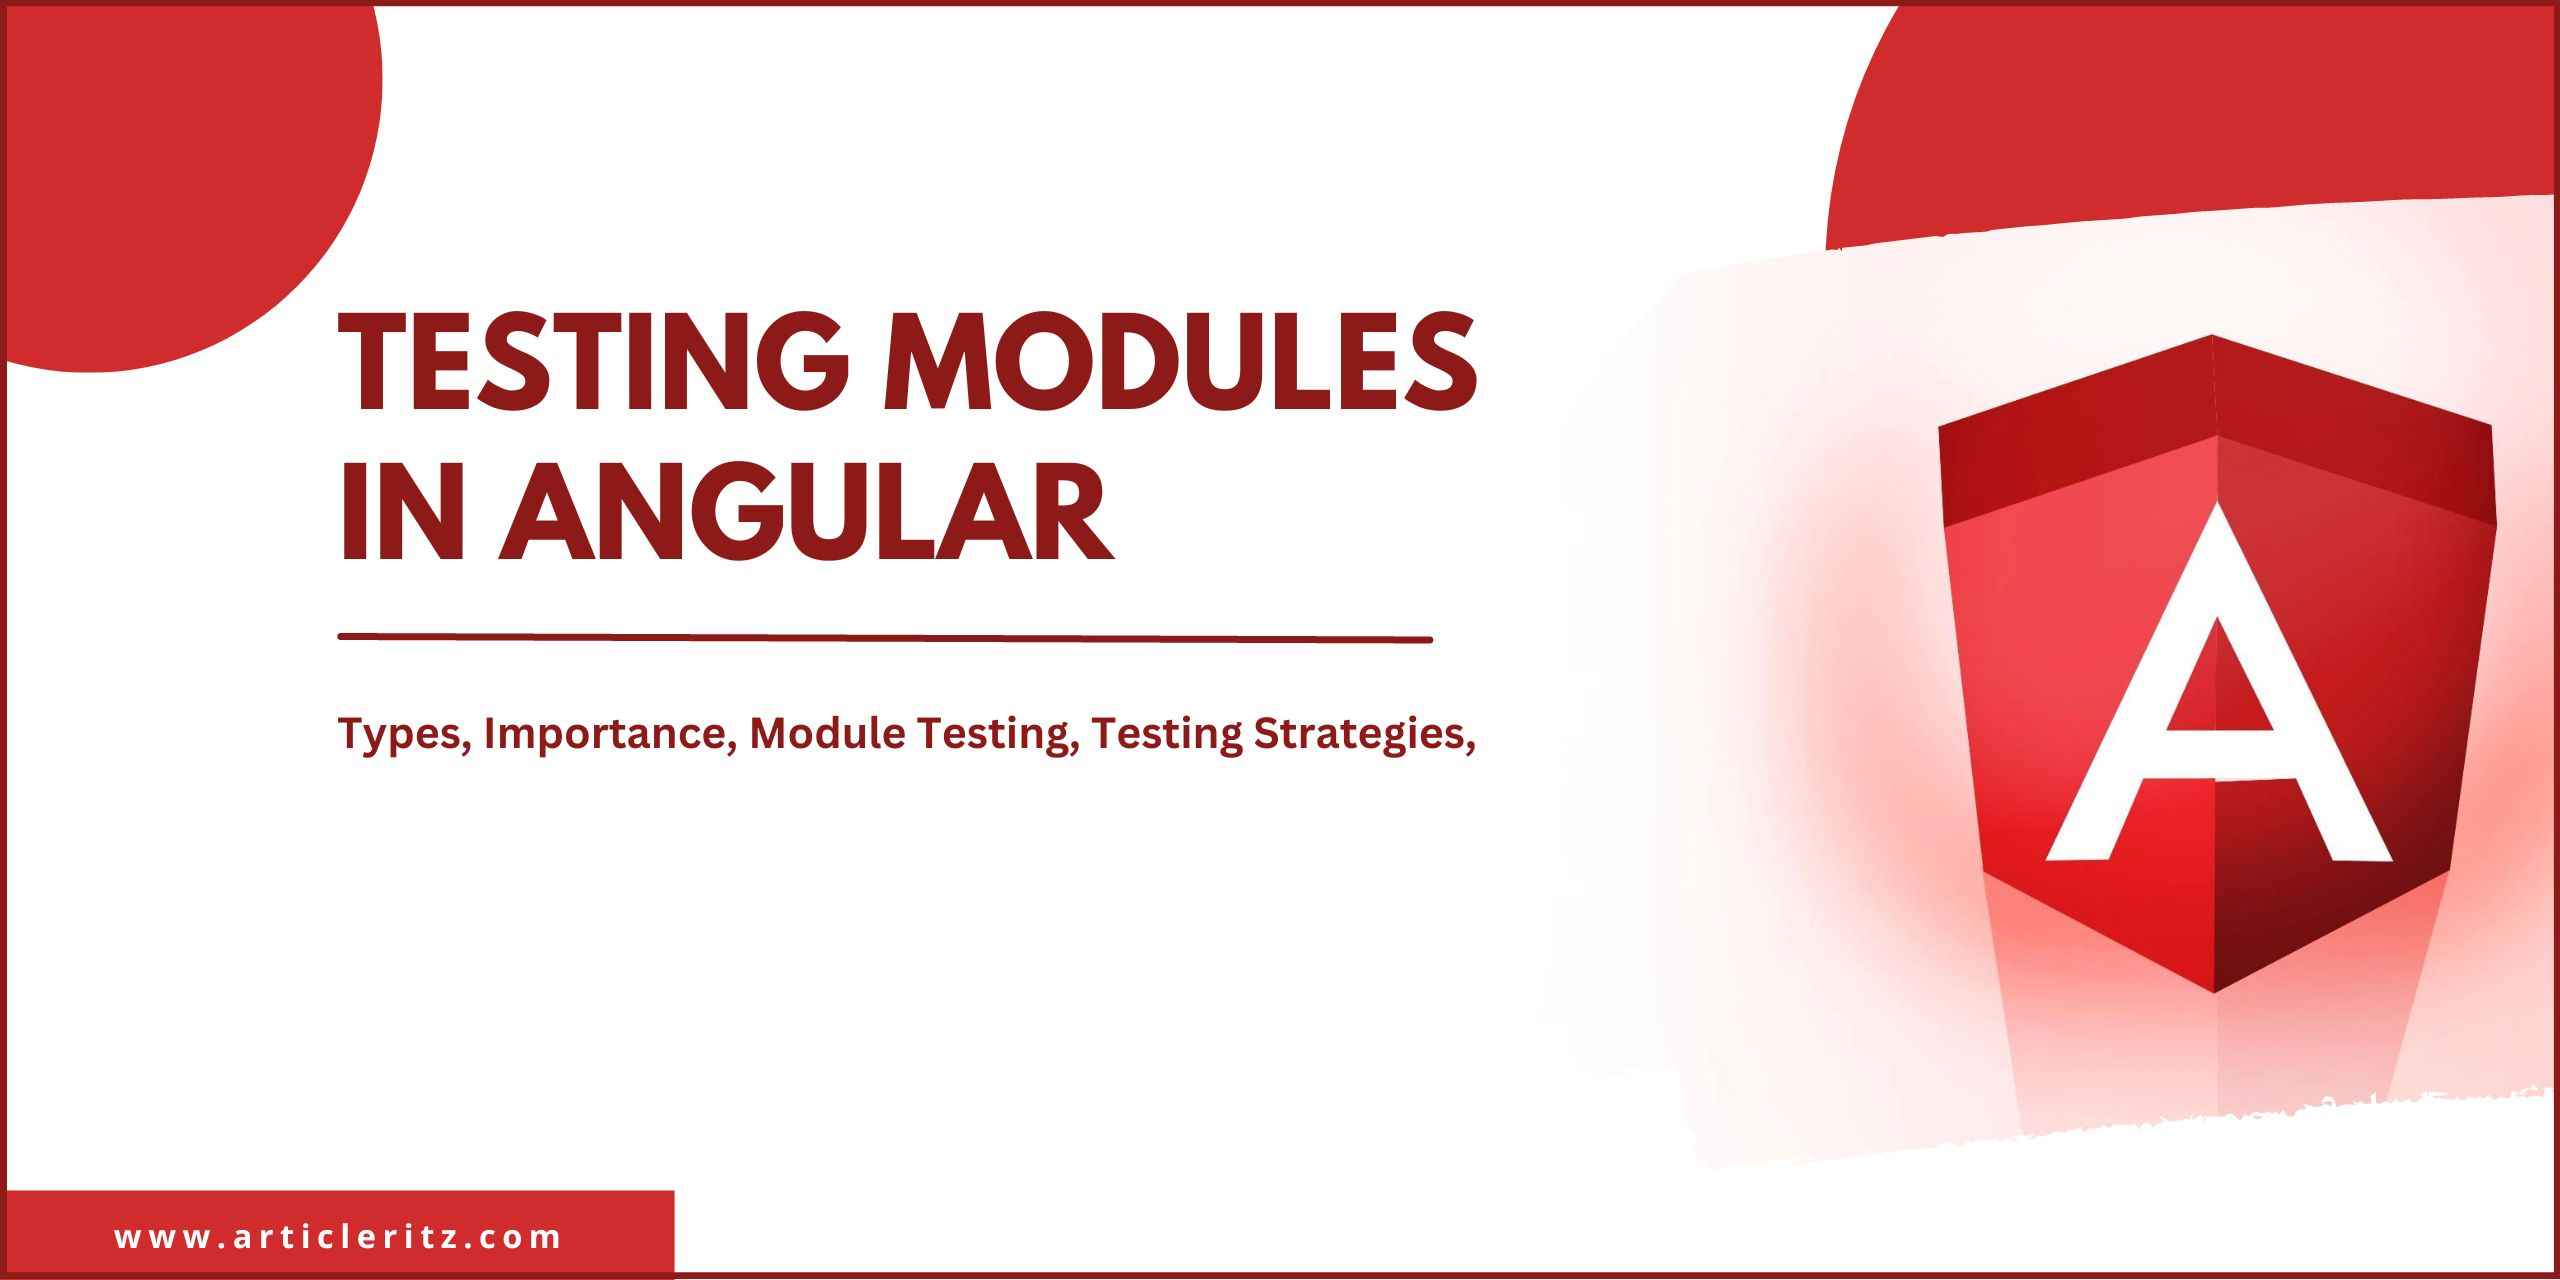 Feature image for Angular Modules blog